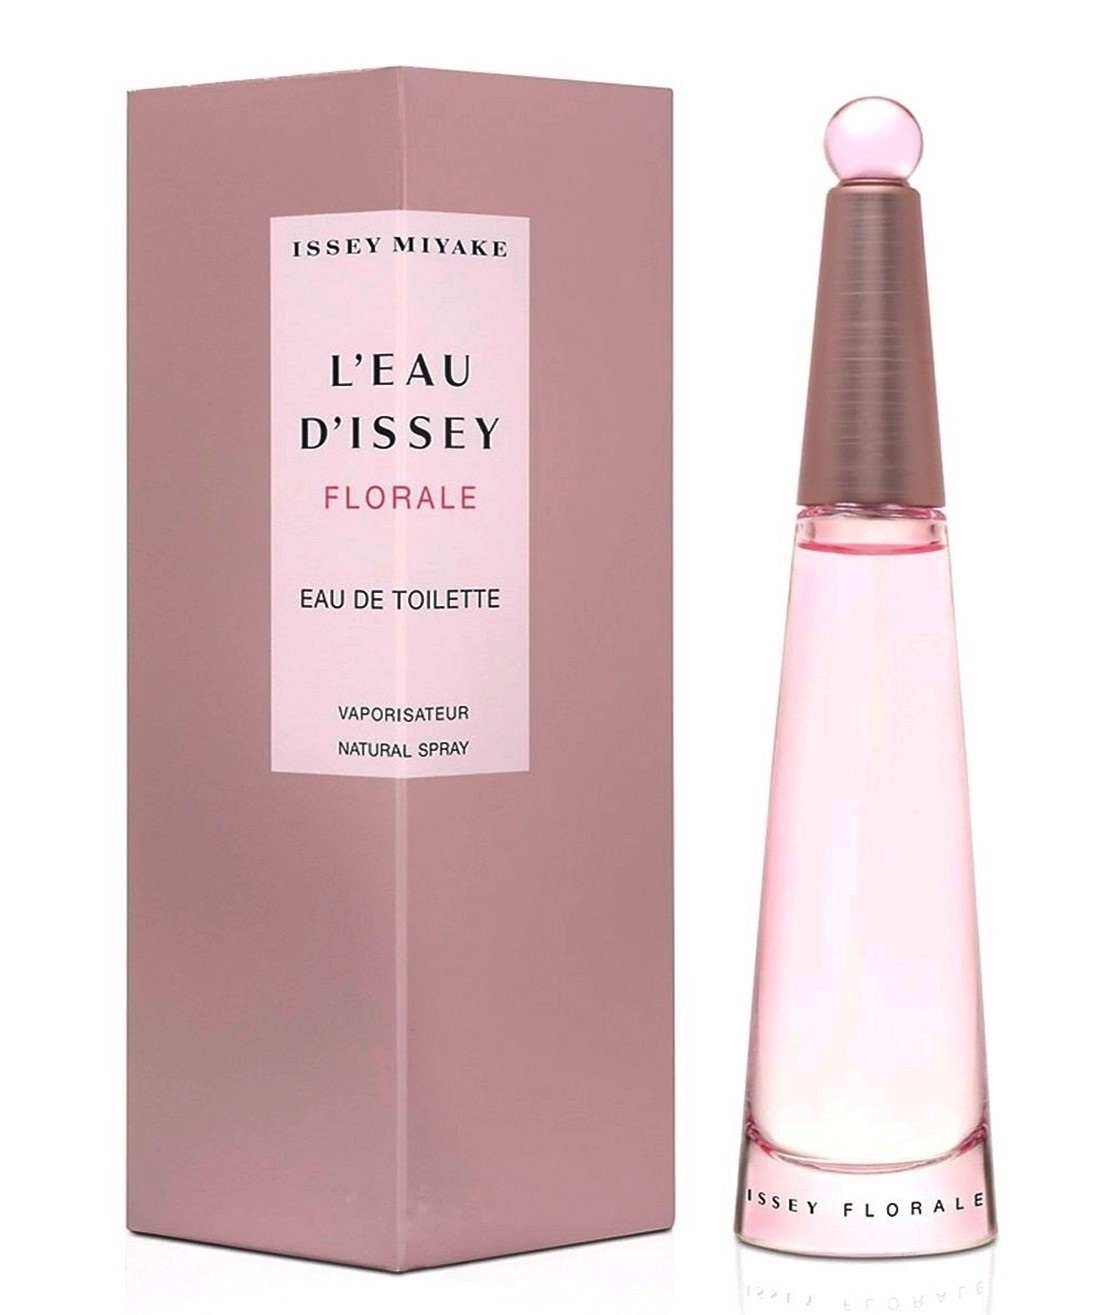 ISSEY MIYAKE L'EAU D'ISSEY FLORALE